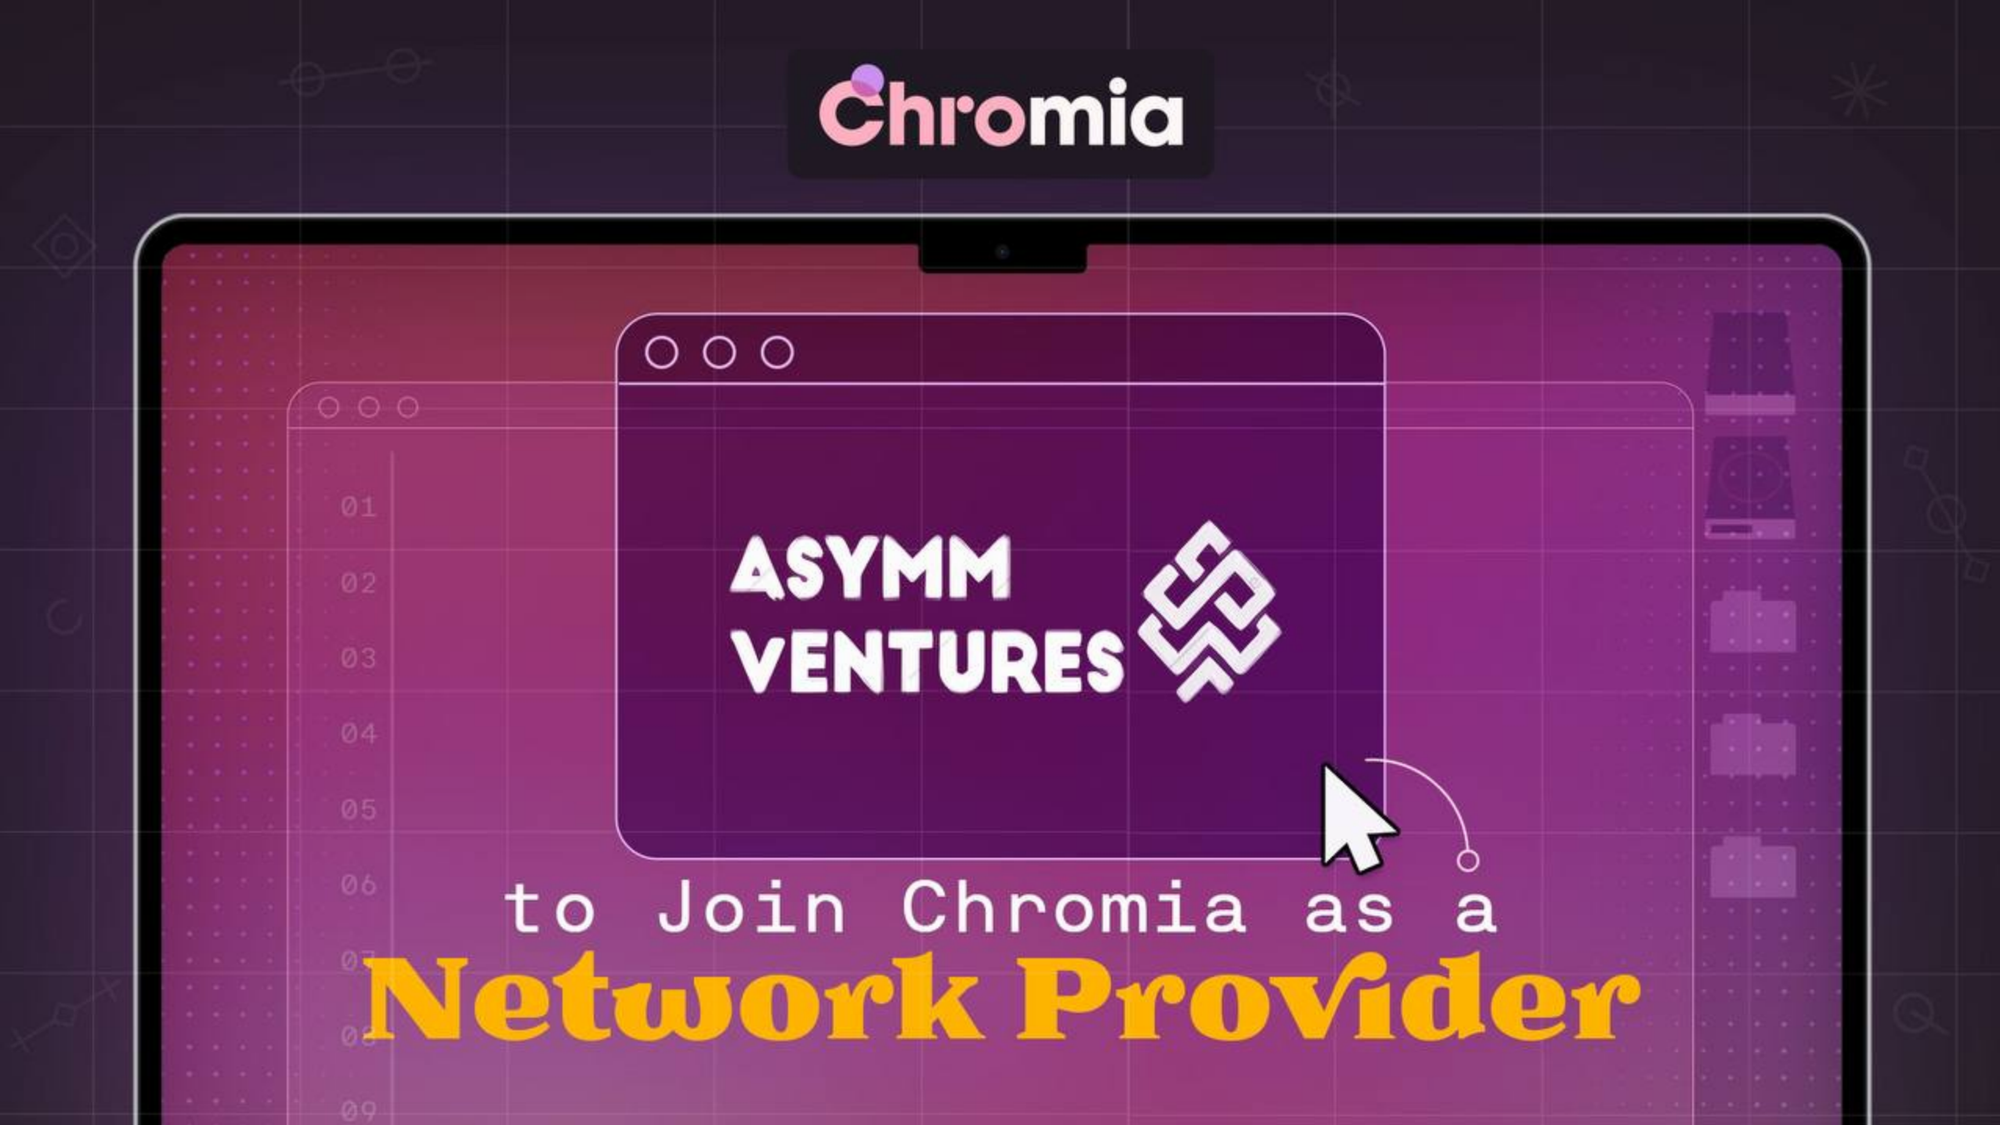 Asymm Ventures to Join Chromia as a Network Provider